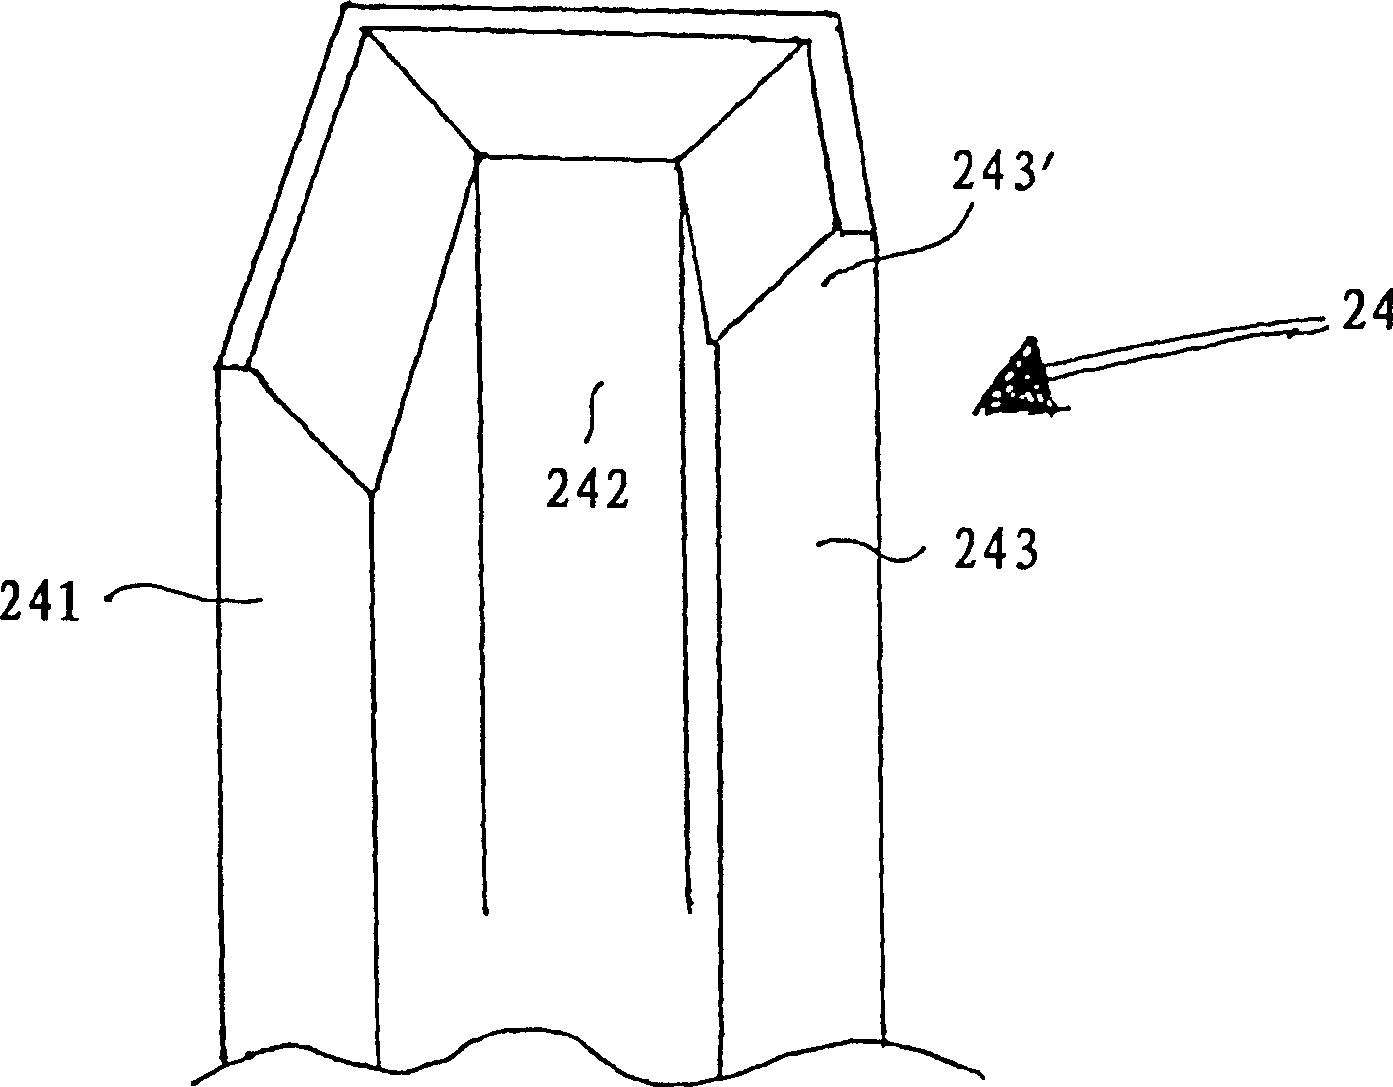 Self-locking, self-adjusting receptacles, particularly containers